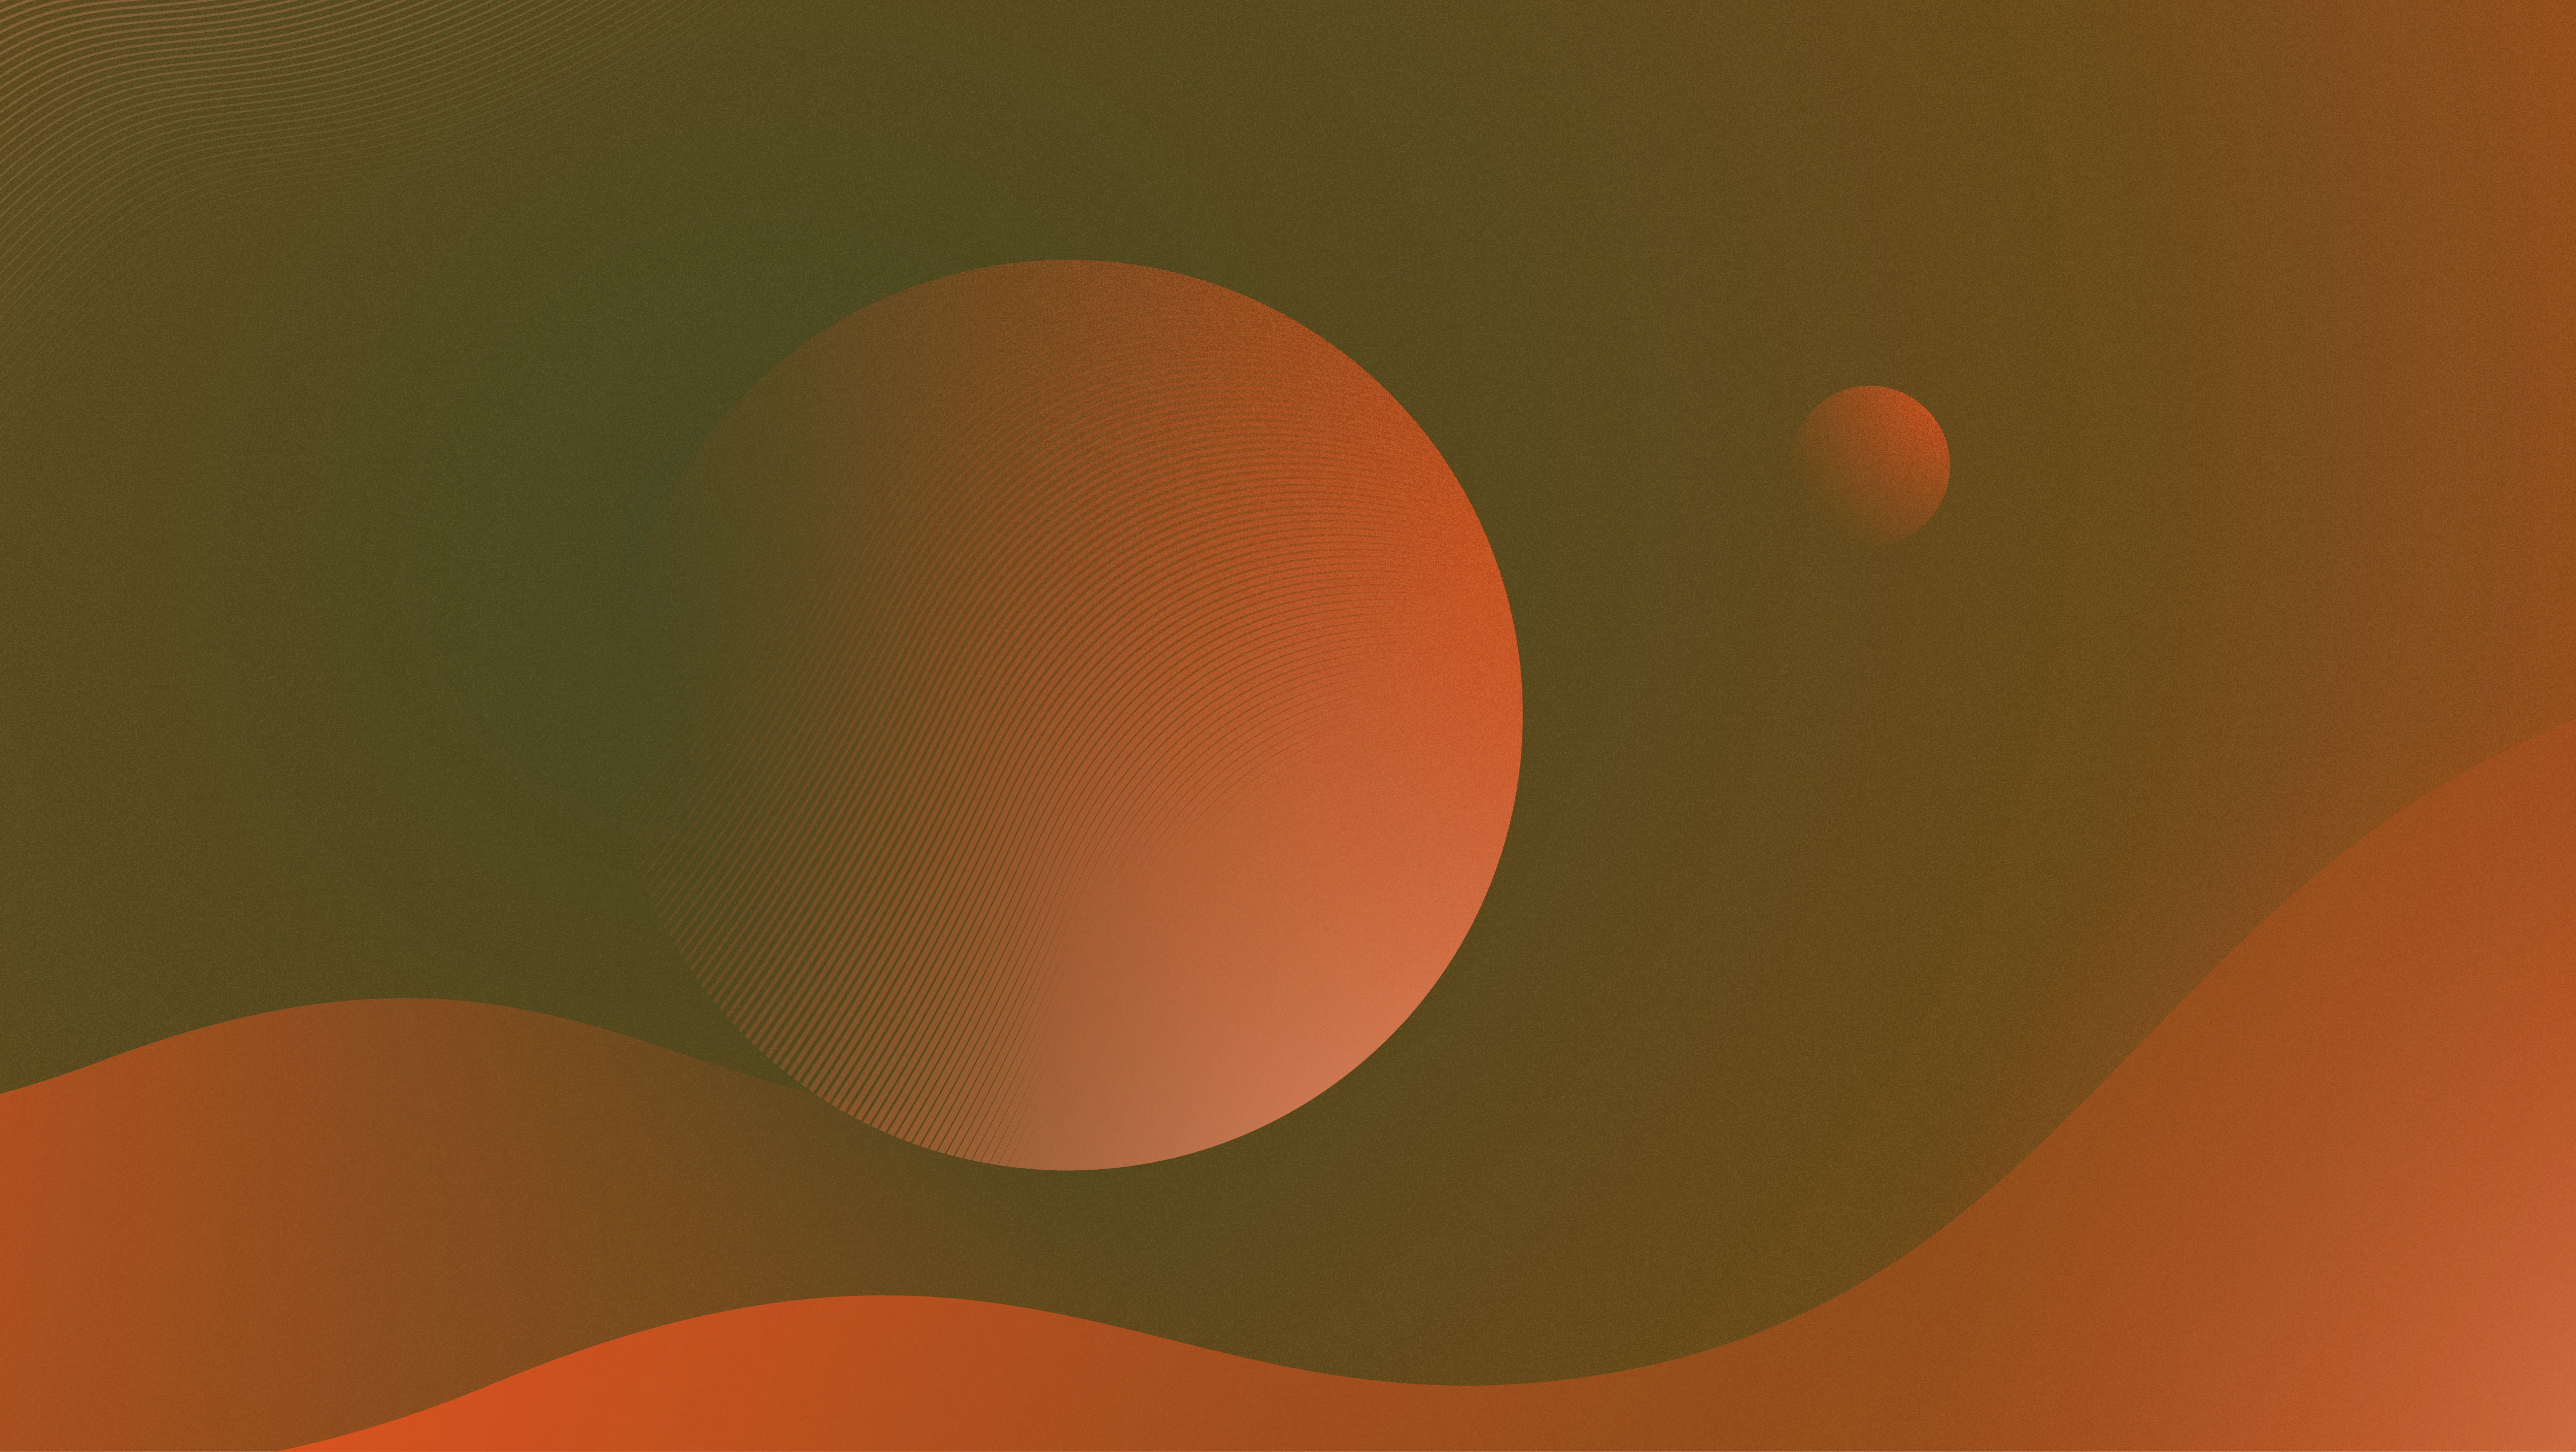 Solar landscape with colorful gradient planets in green and orange 4K by dpcdpc11